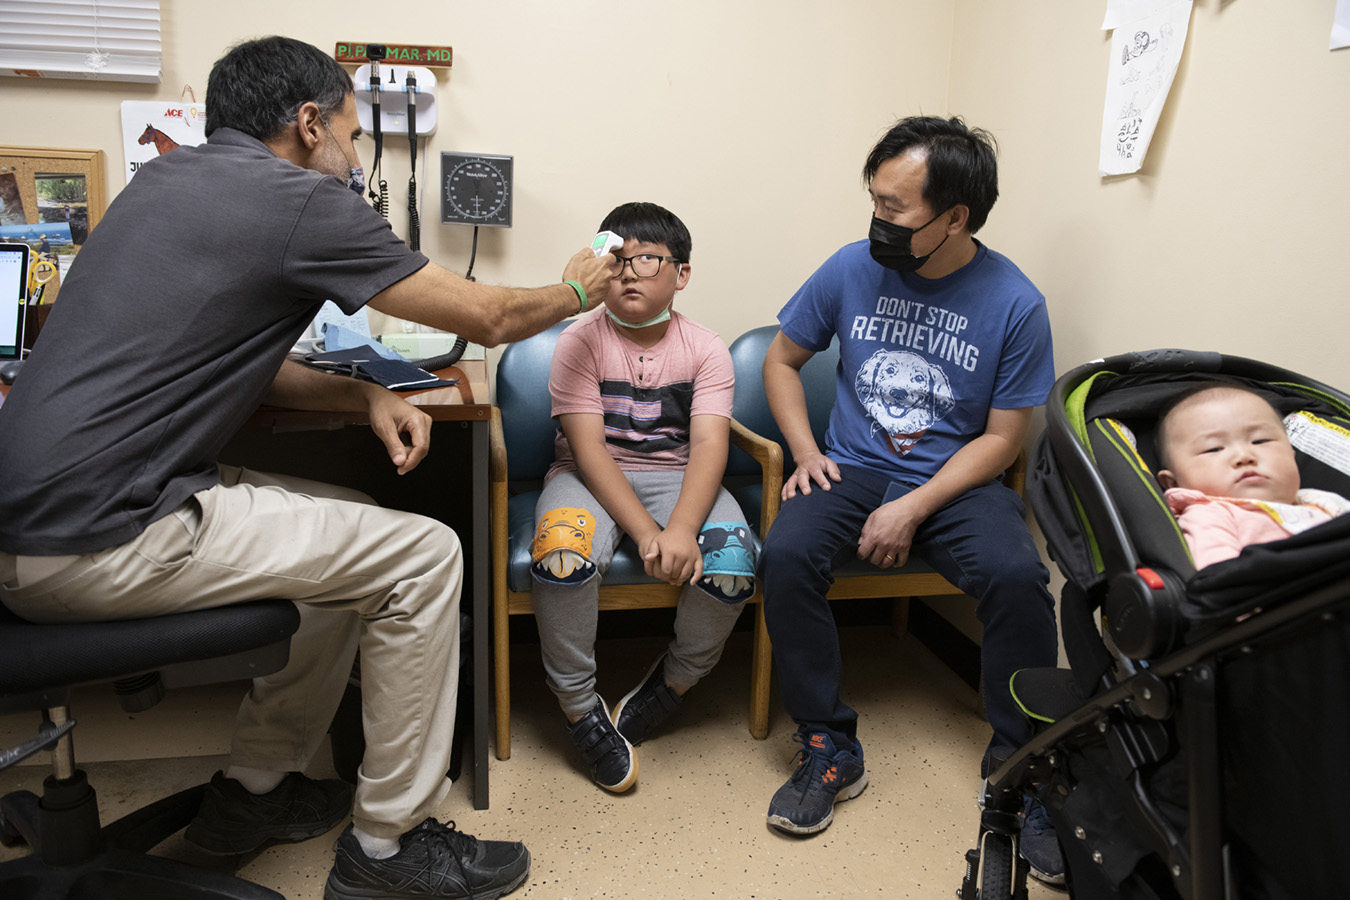 How a Doctor Breaks Norms to Treat Refugees and Recent Immigrants